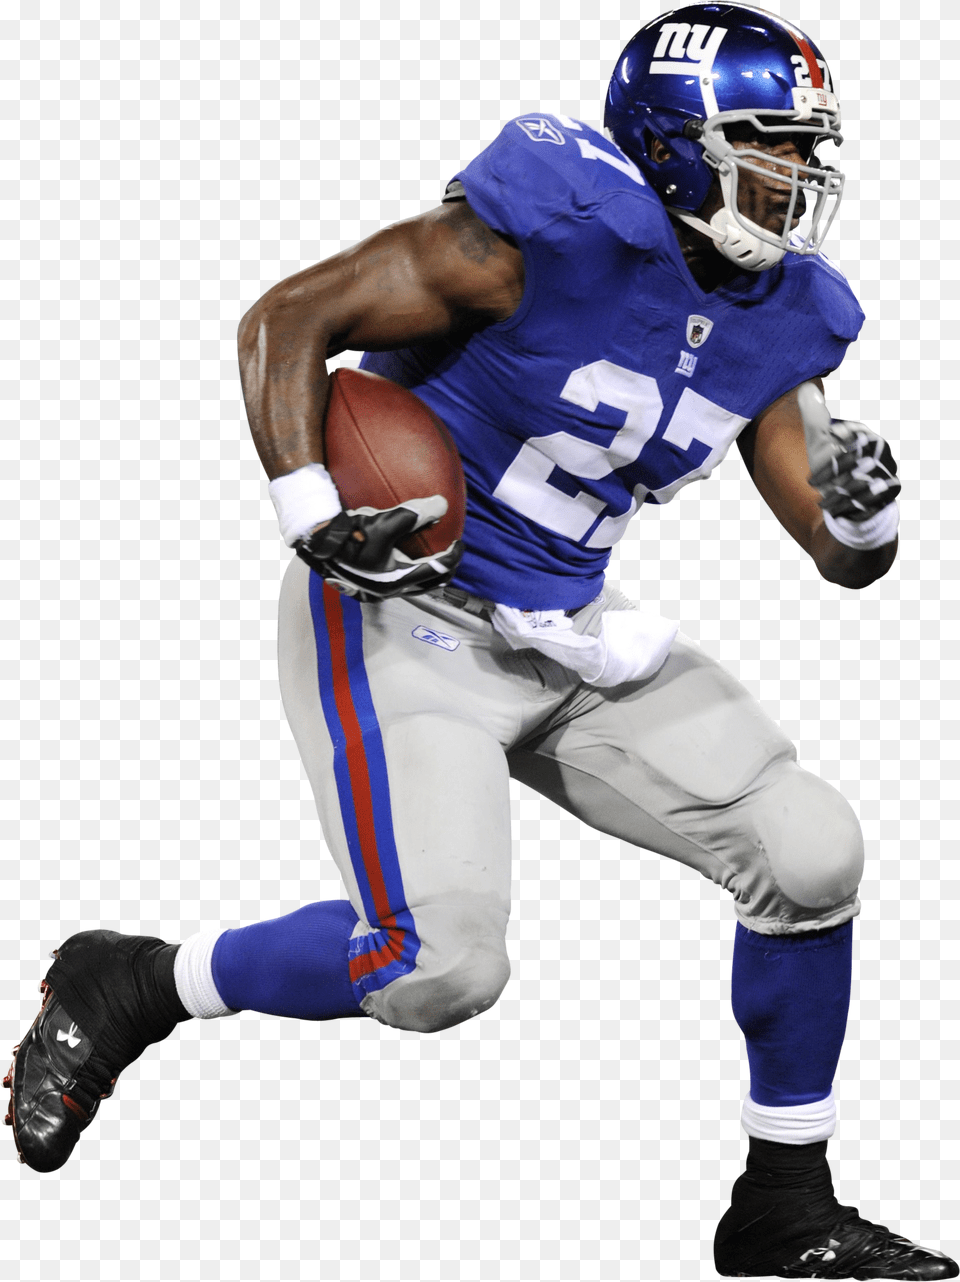 New York Giants Players, Helmet, Clothing, Glove, Playing American Football Png